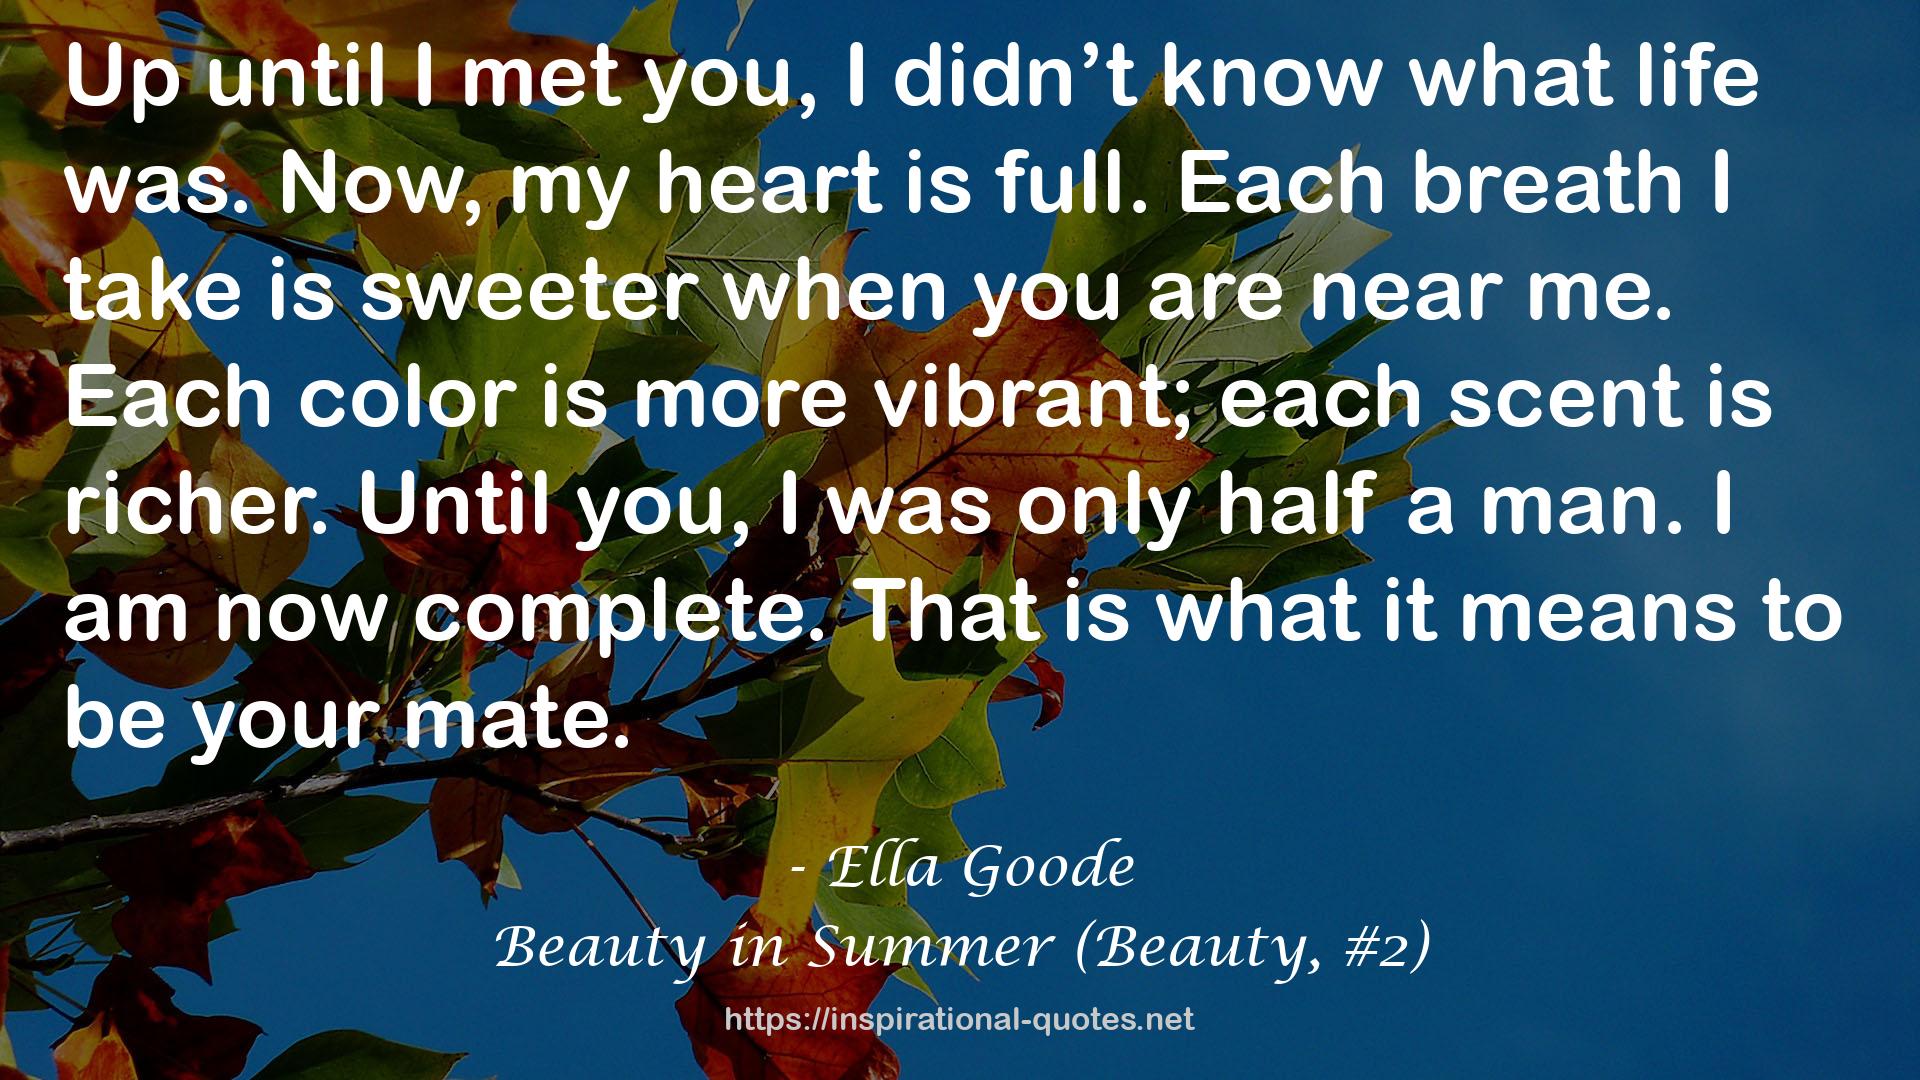 Beauty in Summer (Beauty, #2) QUOTES